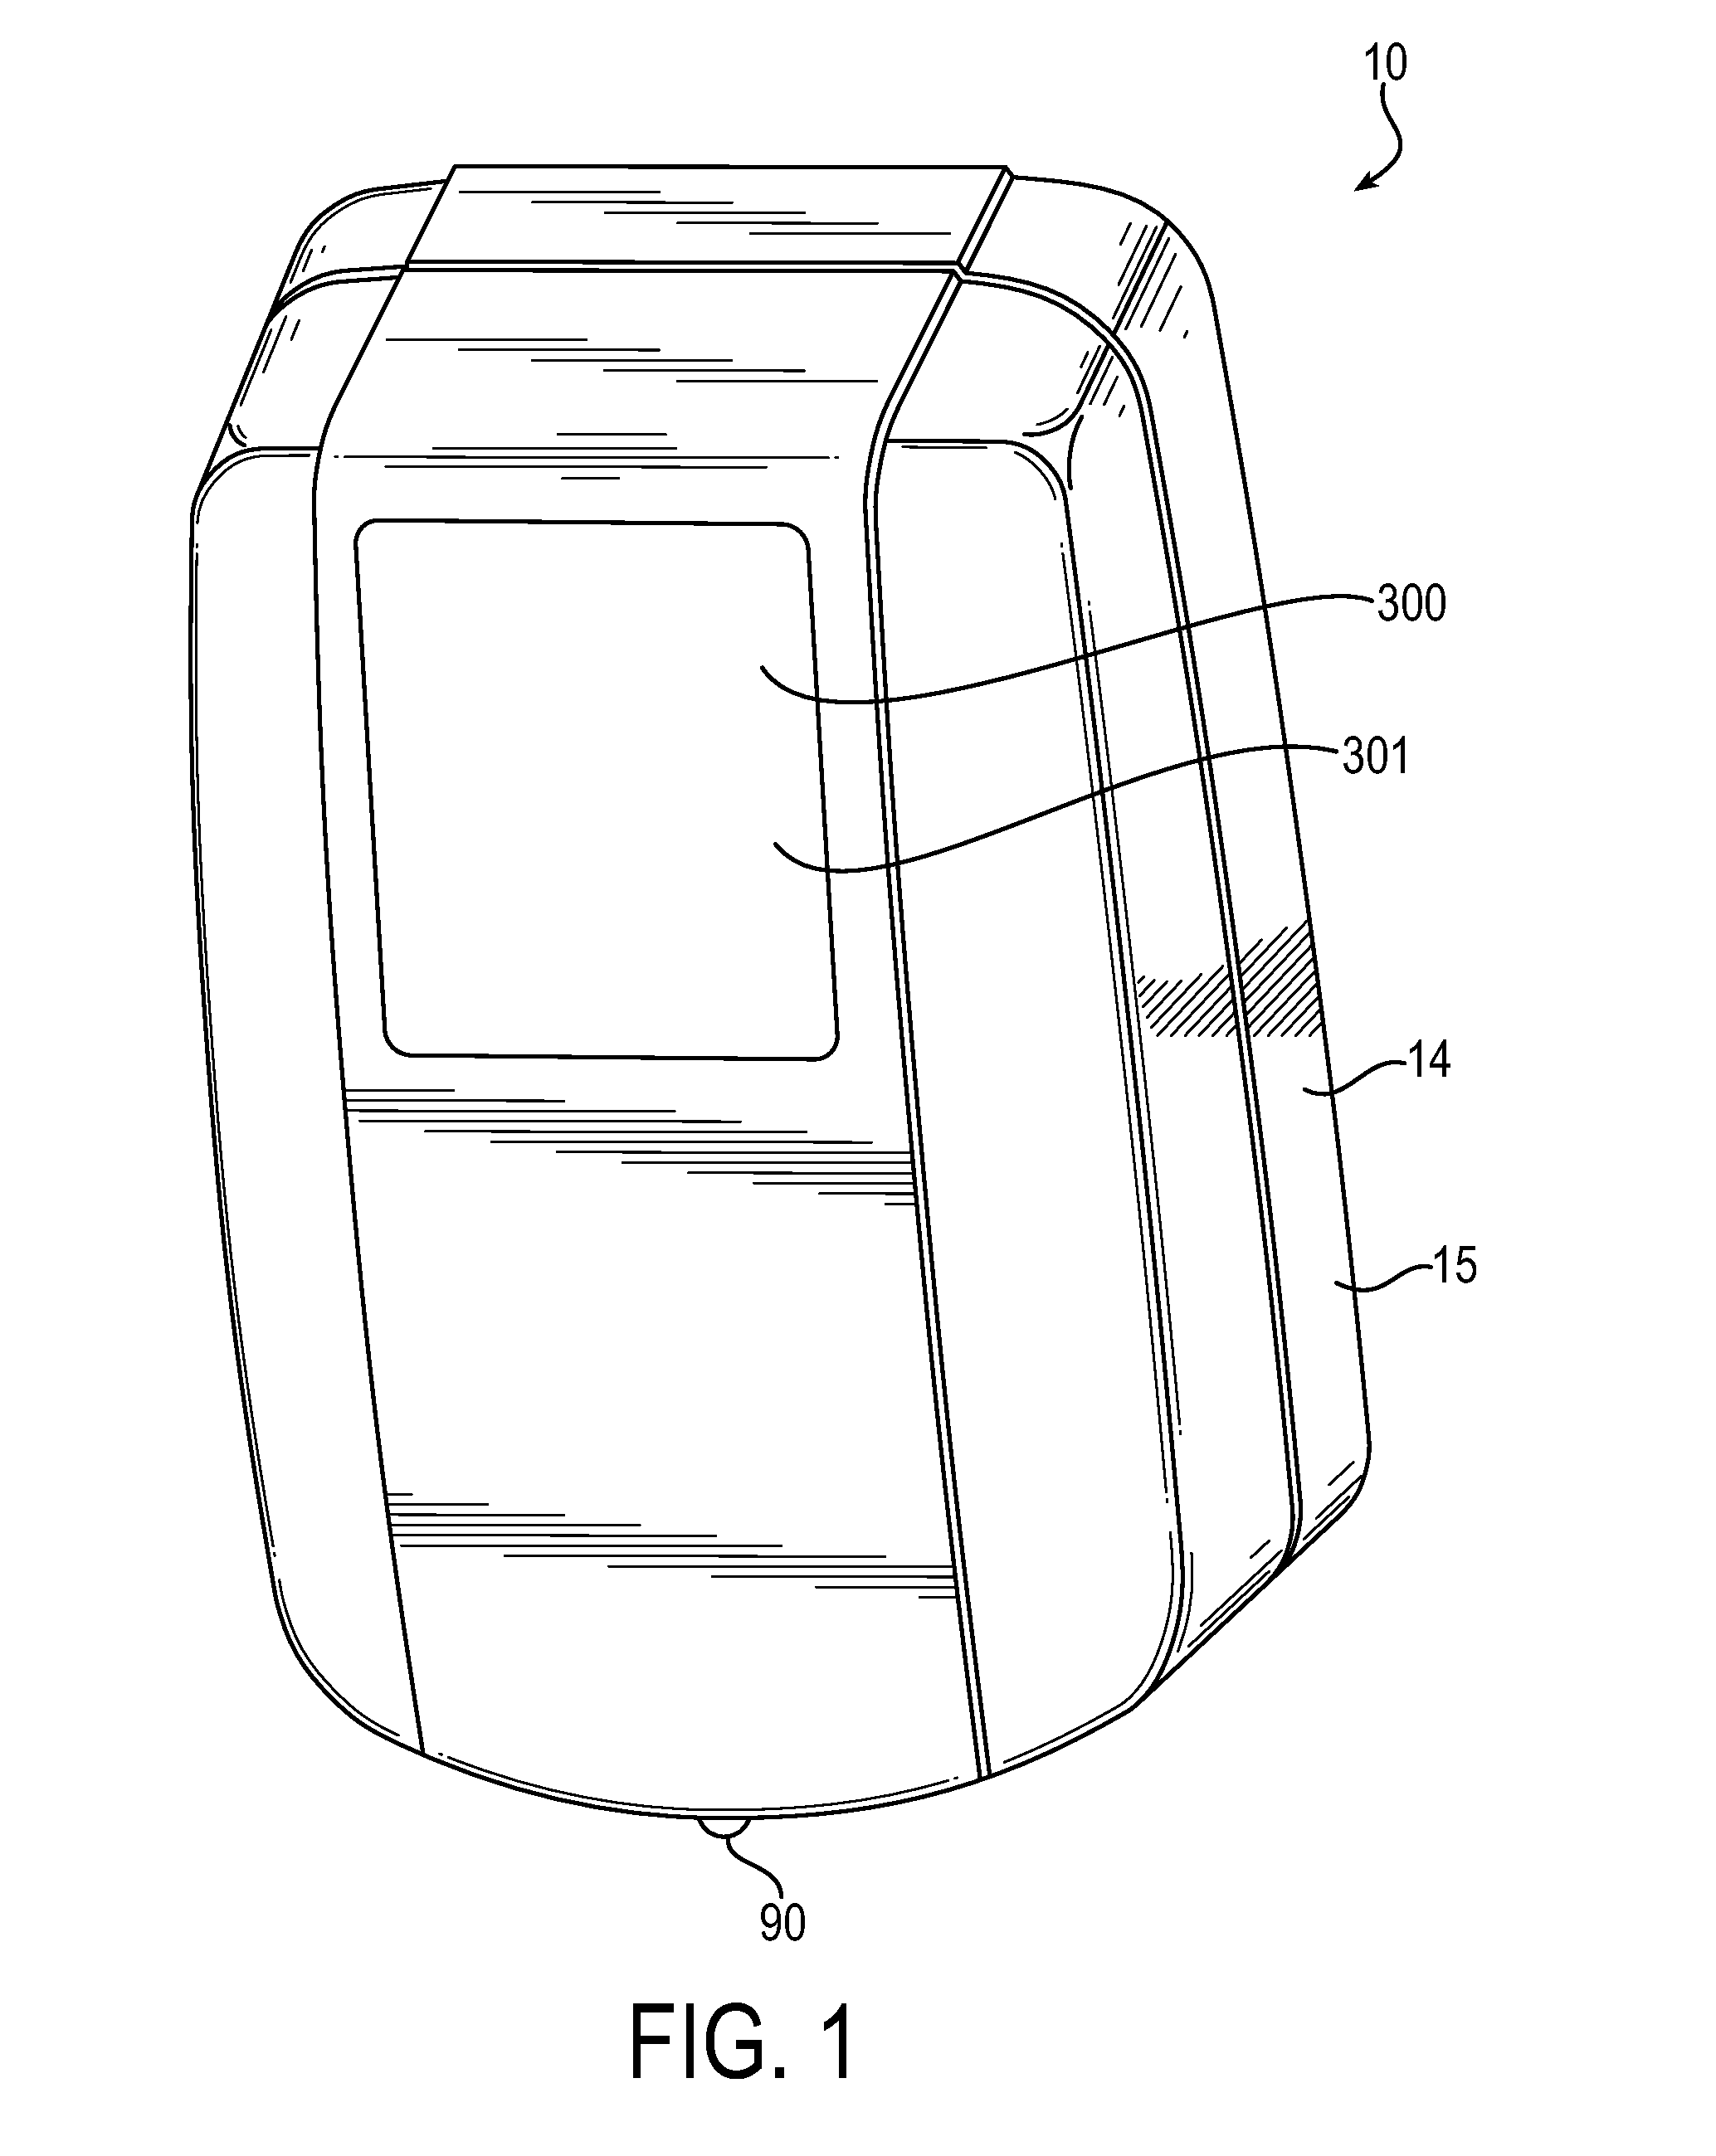 Control for product dispenser energy storage device